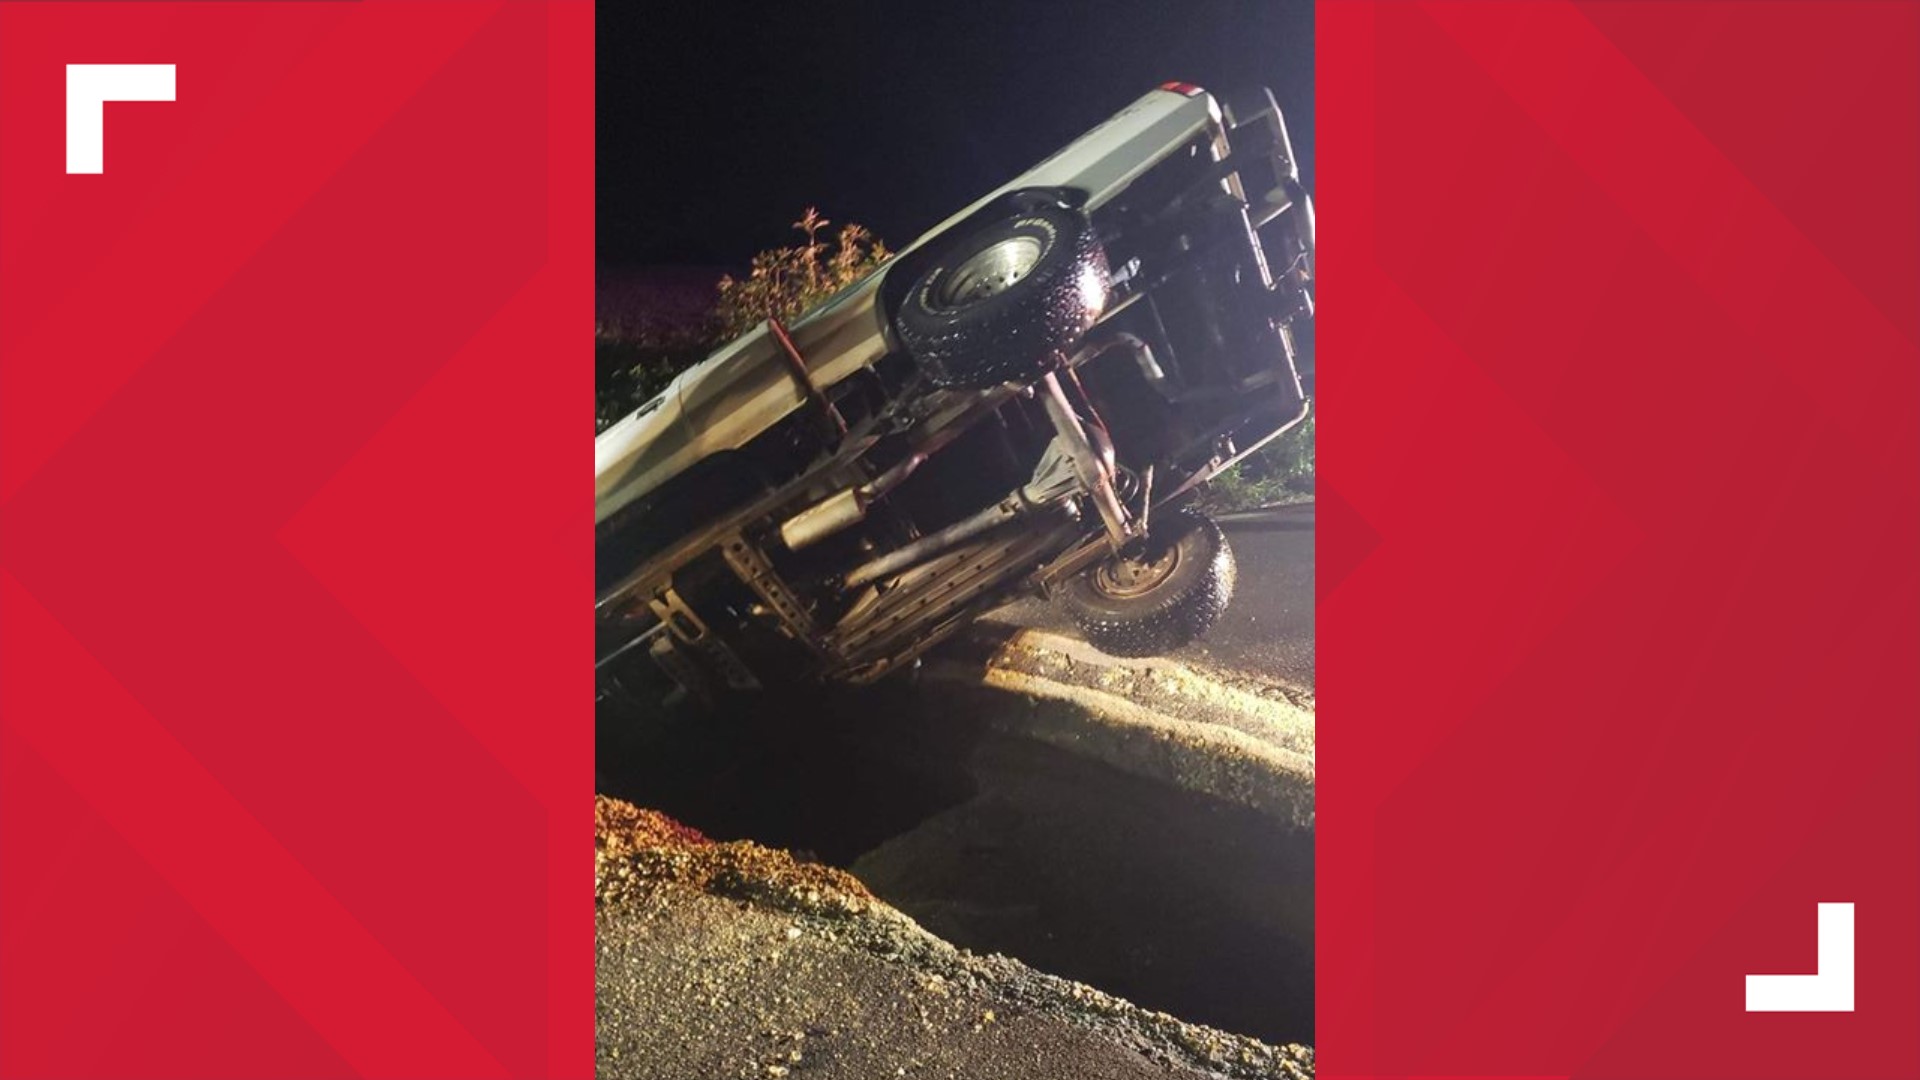 A truck toppled into a split in the road caused by heavy rains Sunday night.